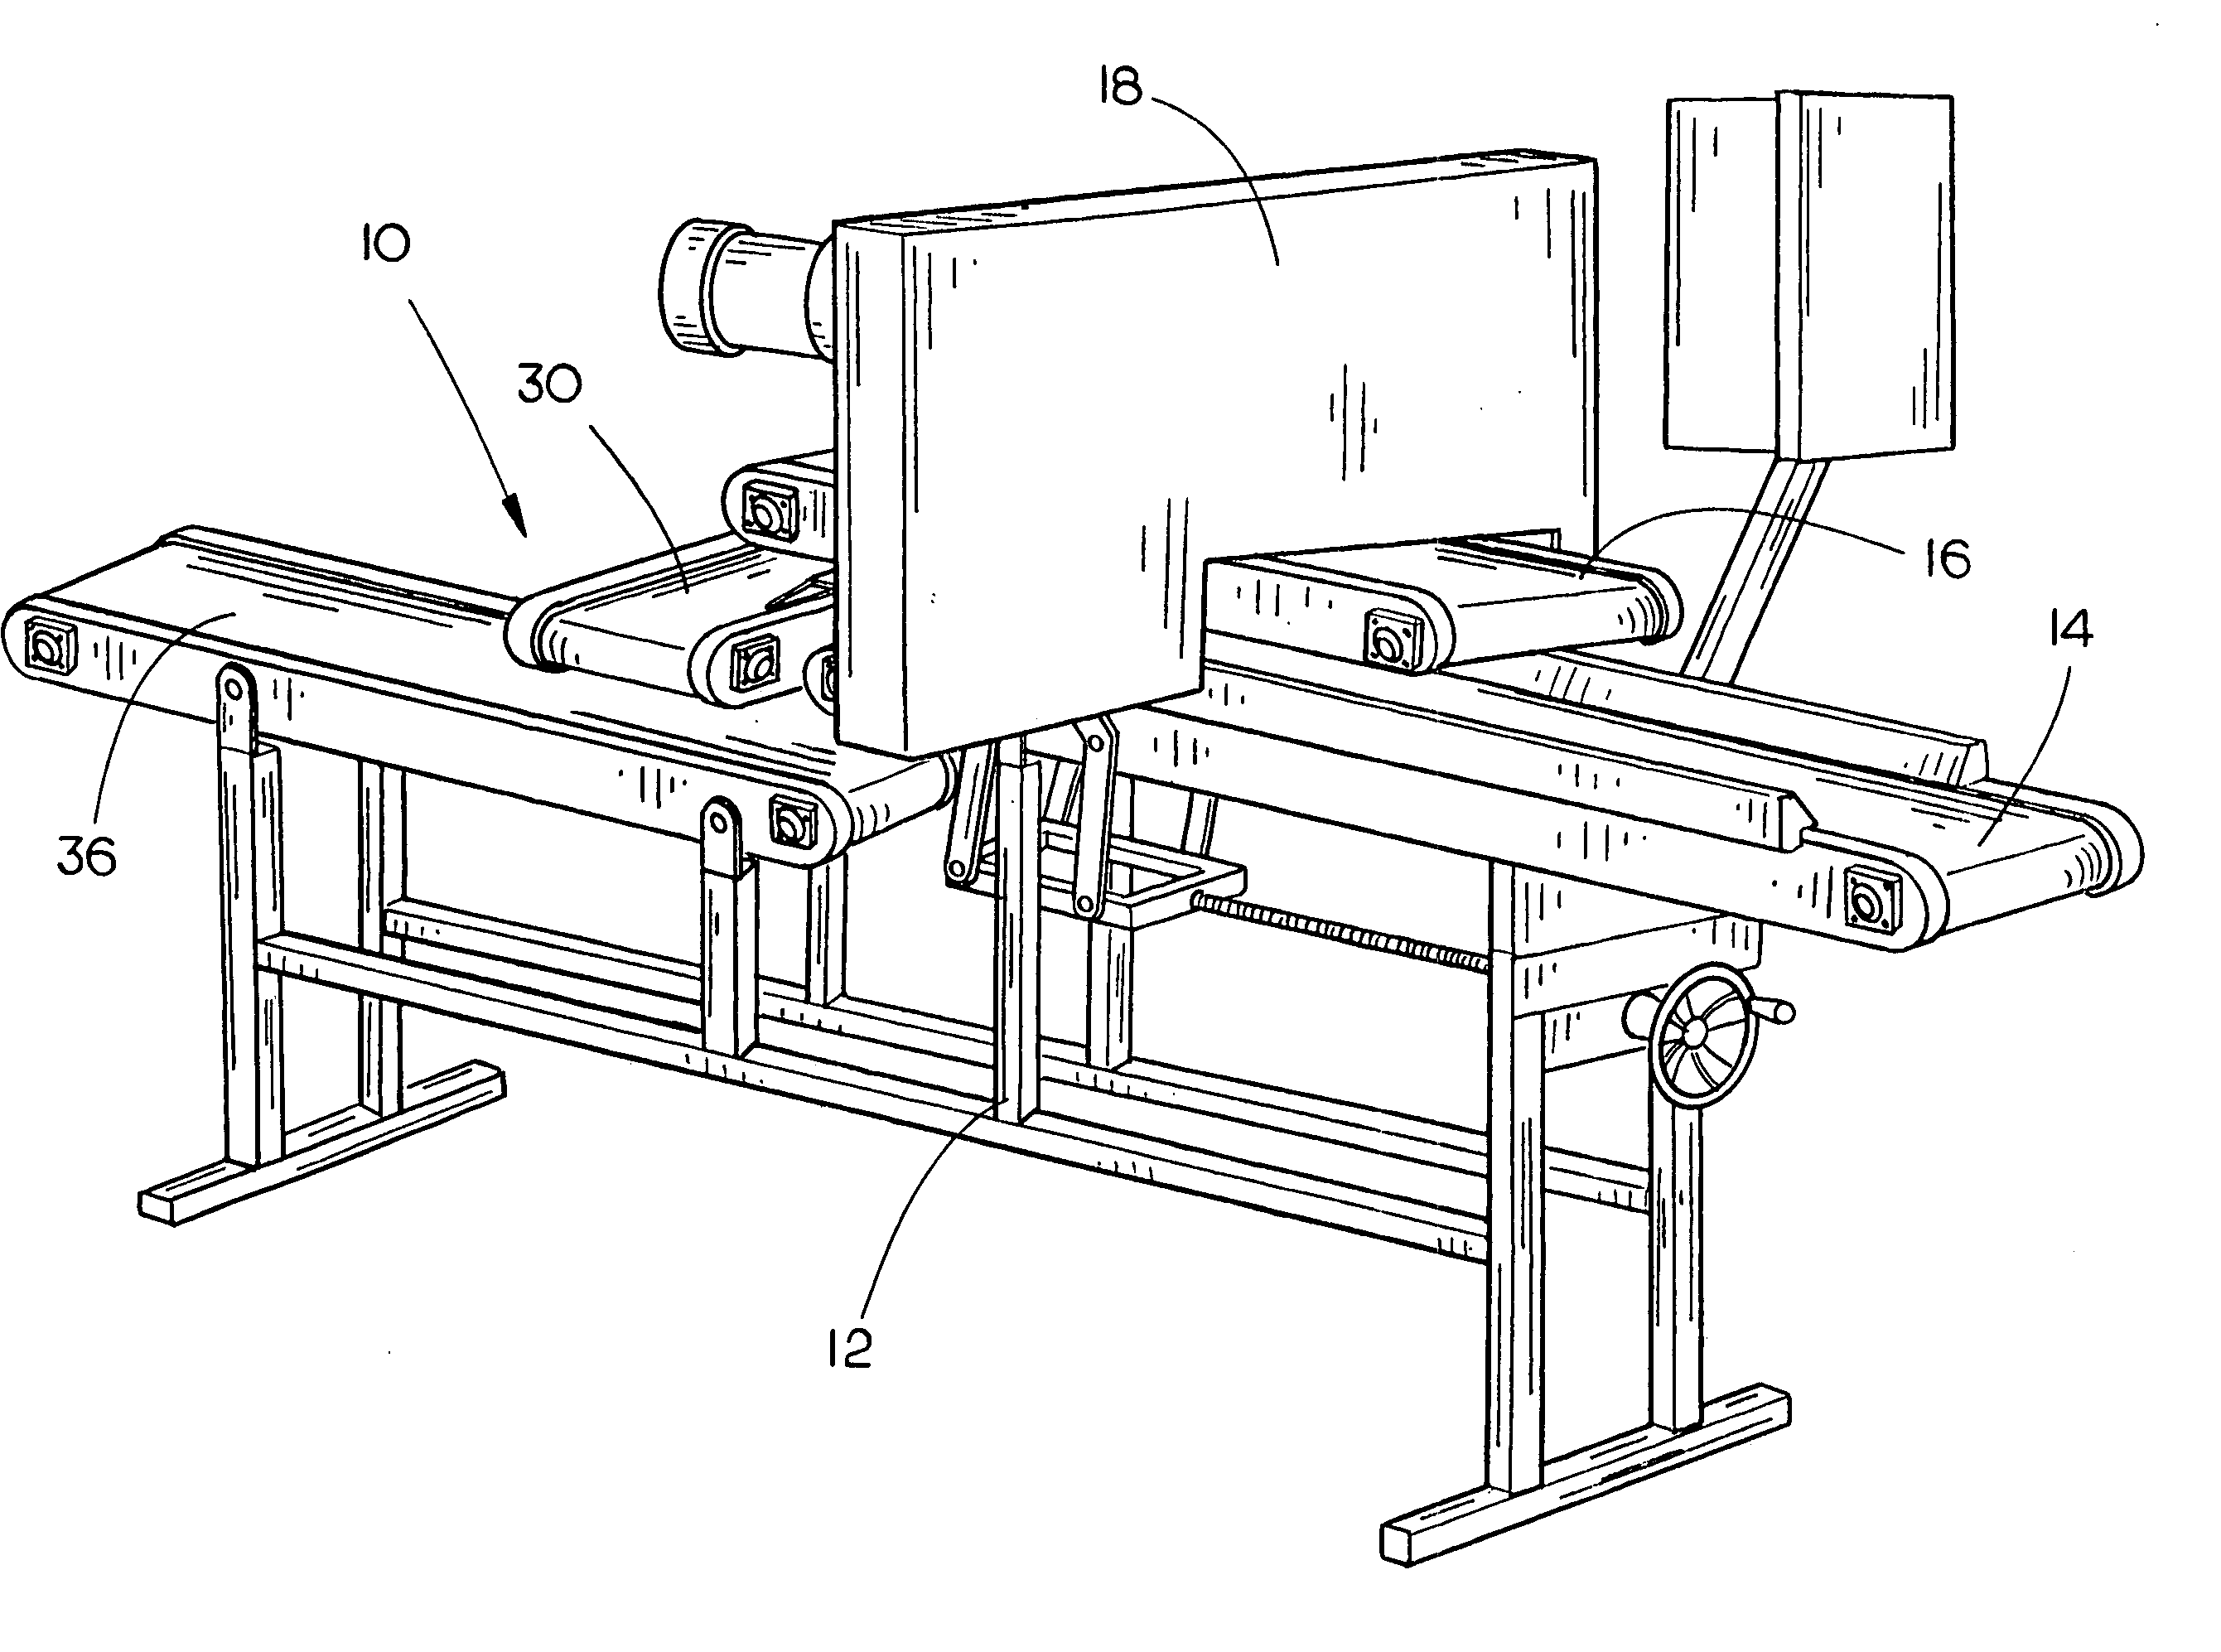 Automatic top slice removal device